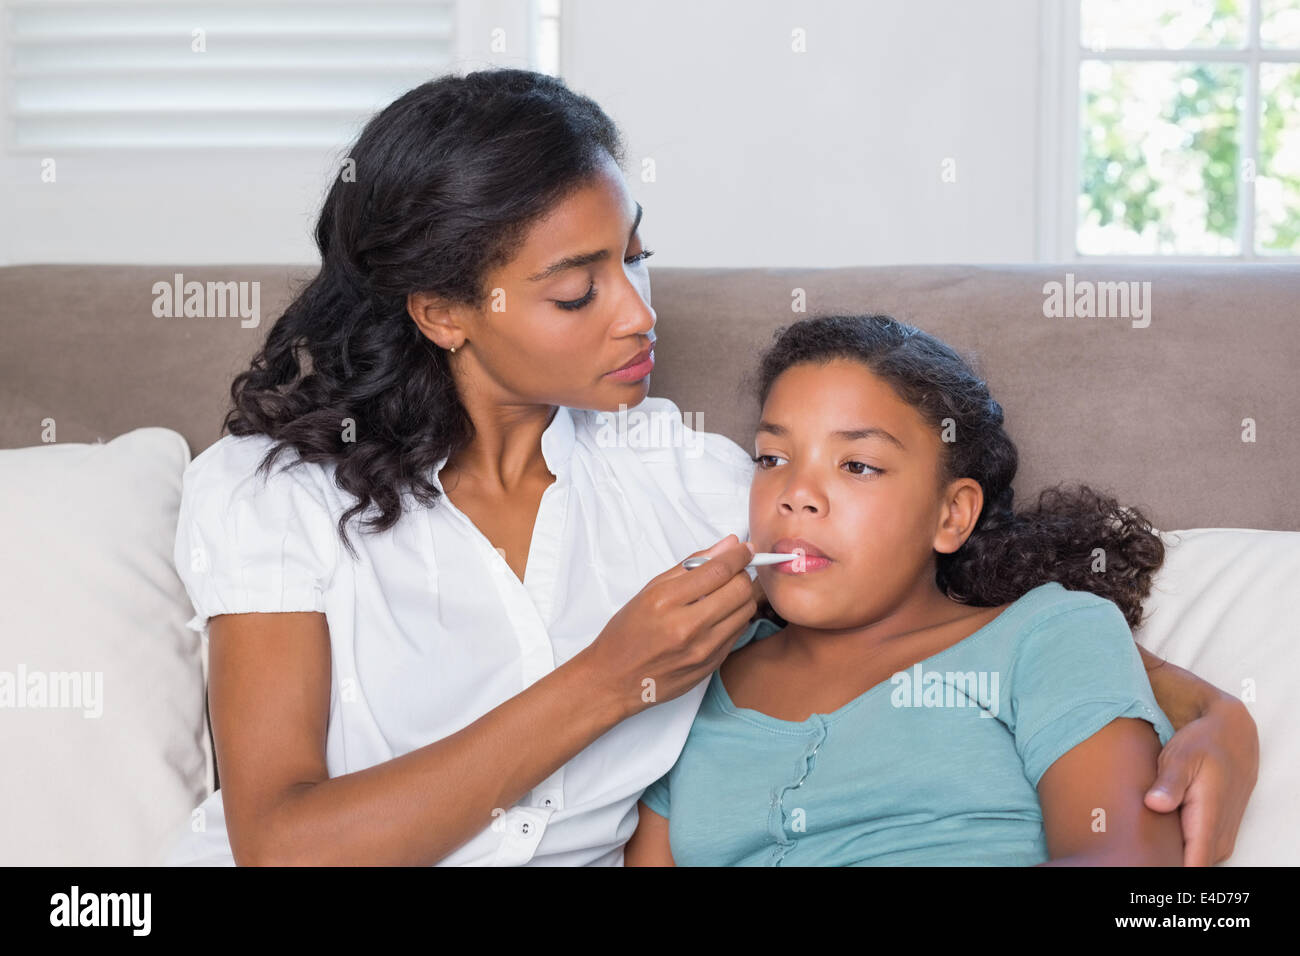 Concerned mother taking her daughters temperature Stock Photo